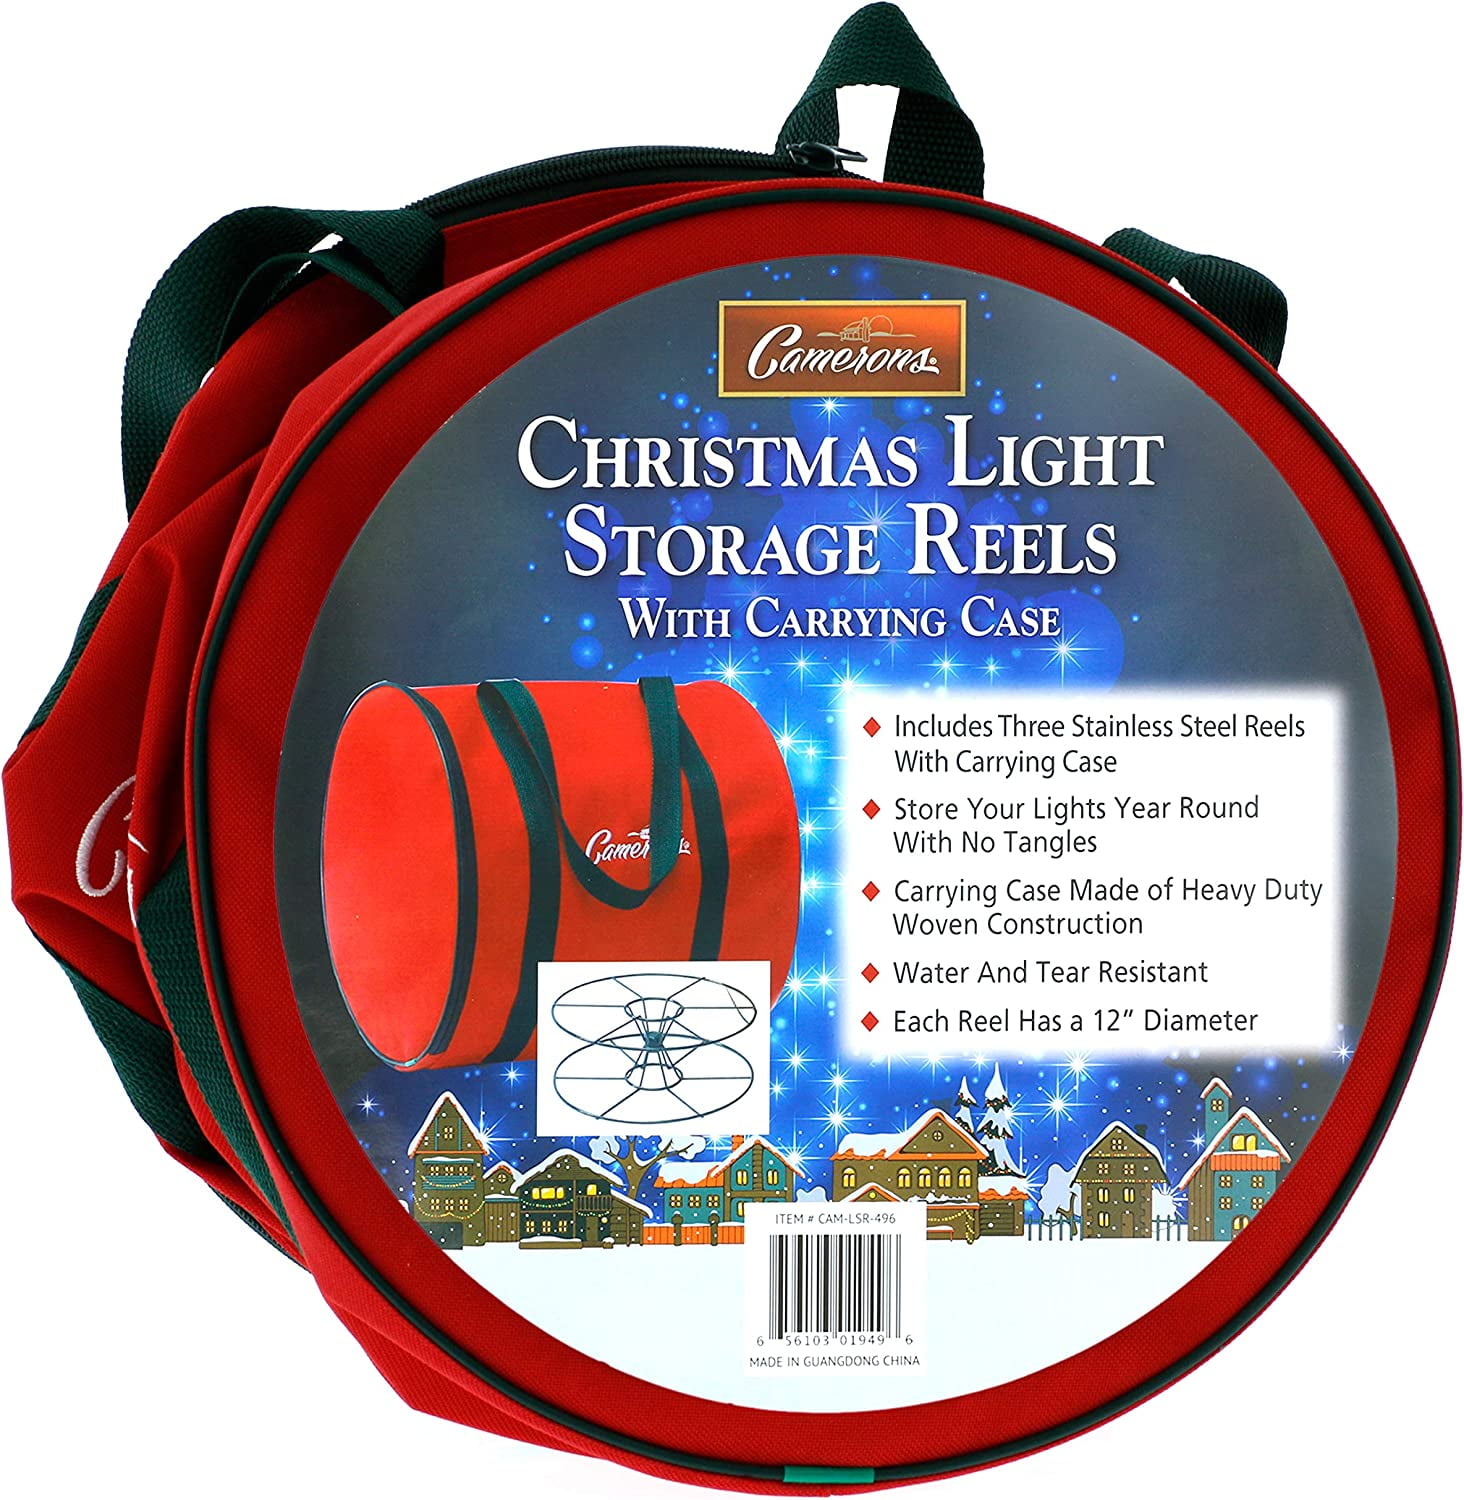 Christmas Light 12 Storage Reels Container (3pk) - Heavy Duty Metal  Construction with X-Mas Carrying Bag Case for House Tree Lights 